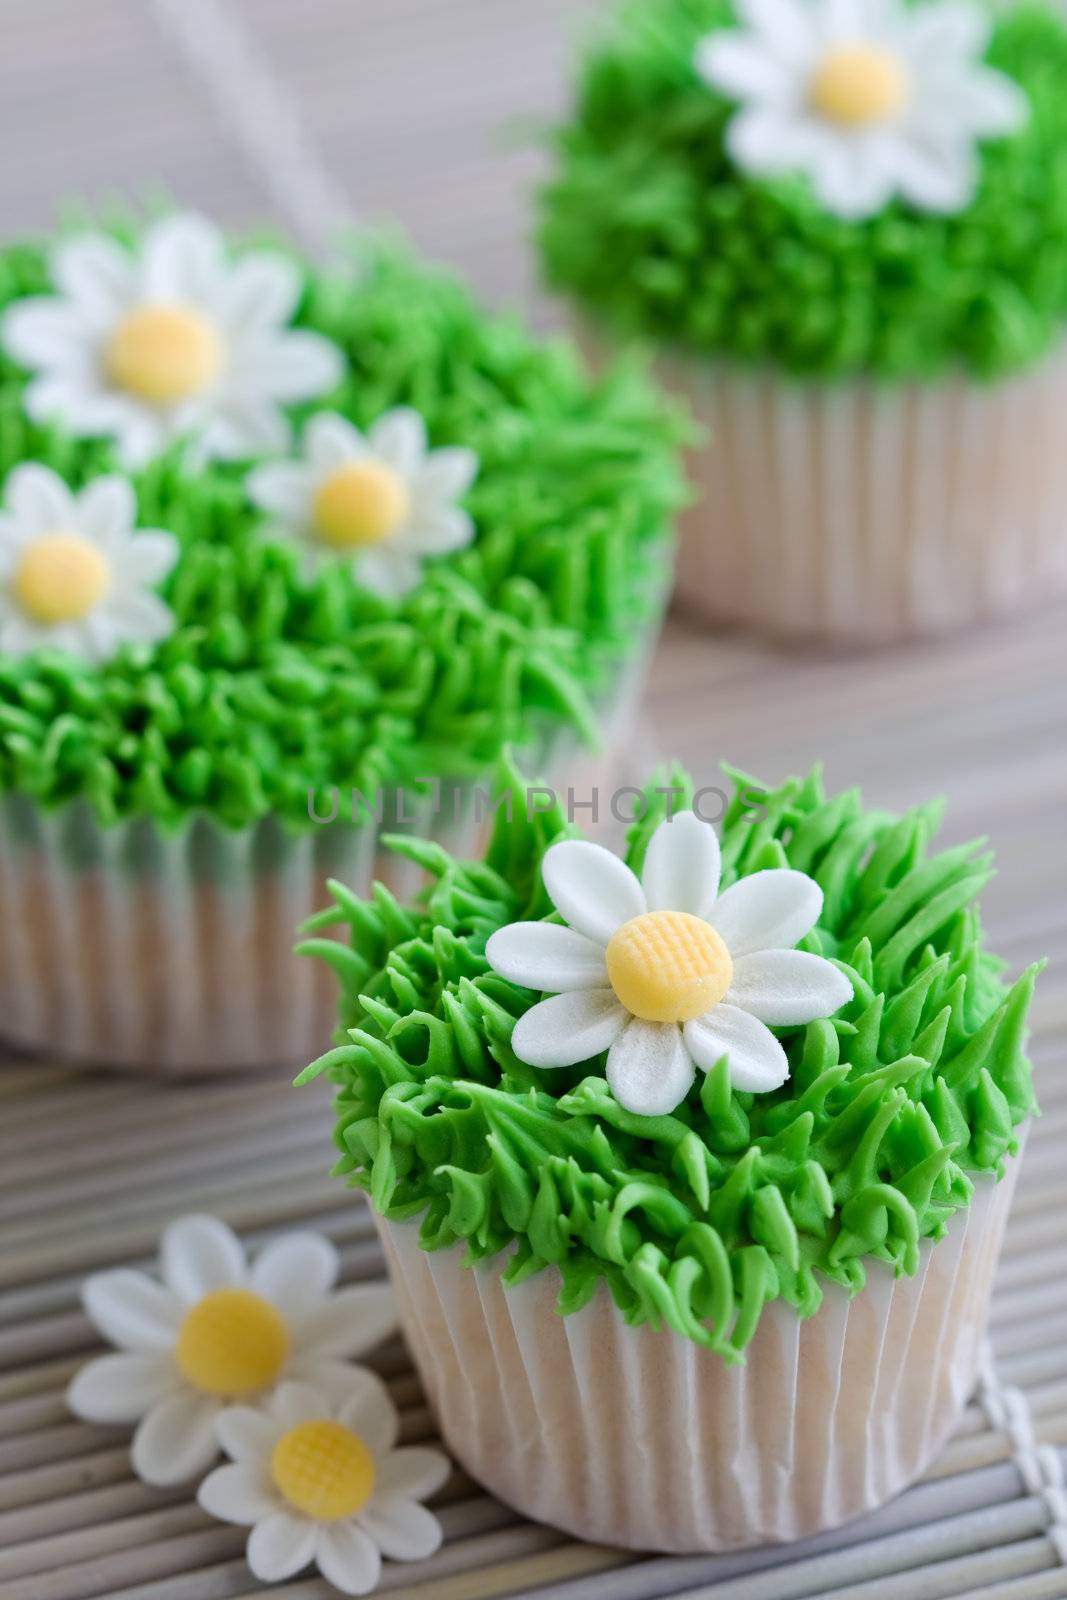 Cupcakes decorated with frosted grass and sugar daisies